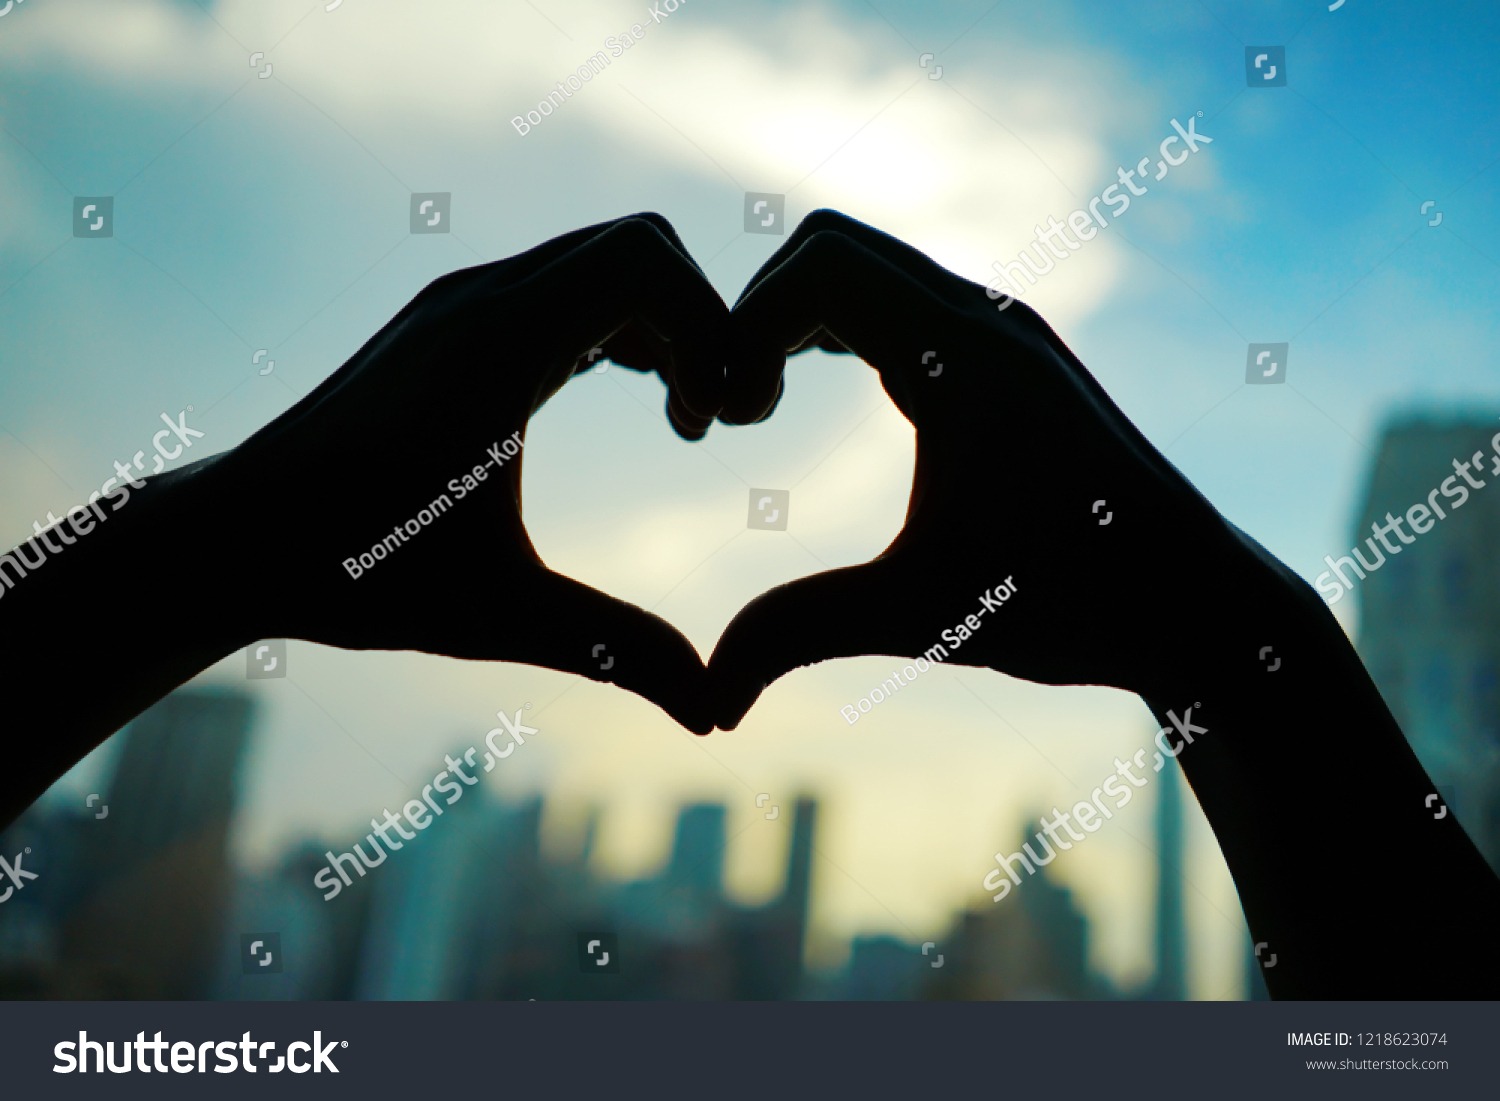 Silhouette hands making heart shaped hand gesture on blurred background of cityscape with high rise business metropolis building and skyscape with clouds at early morning or evening moment. #1218623074